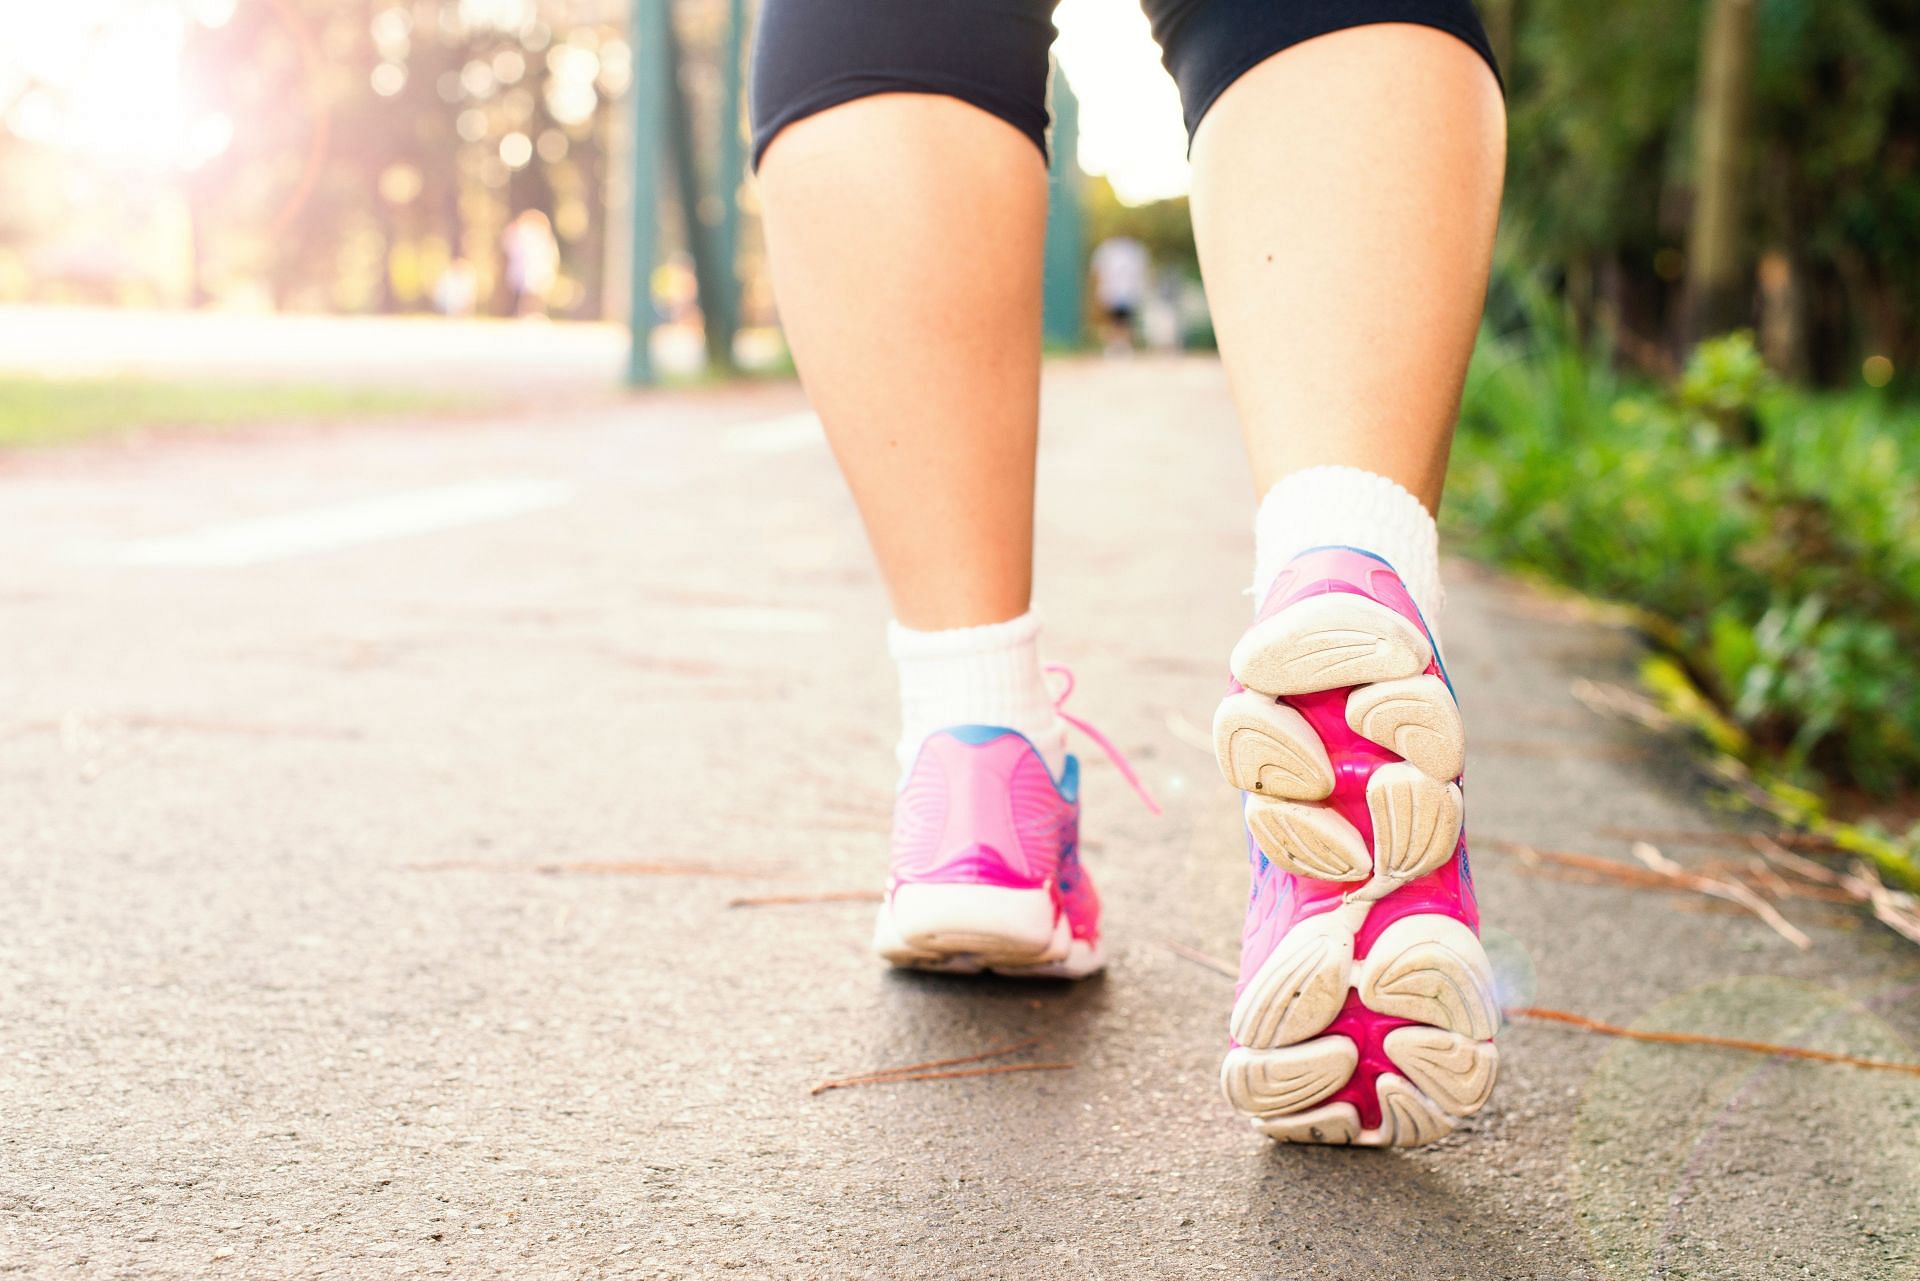 Daily walking can help burn belly fat and provide several other health benefits. (Image via Pexels / Daniel Reche)